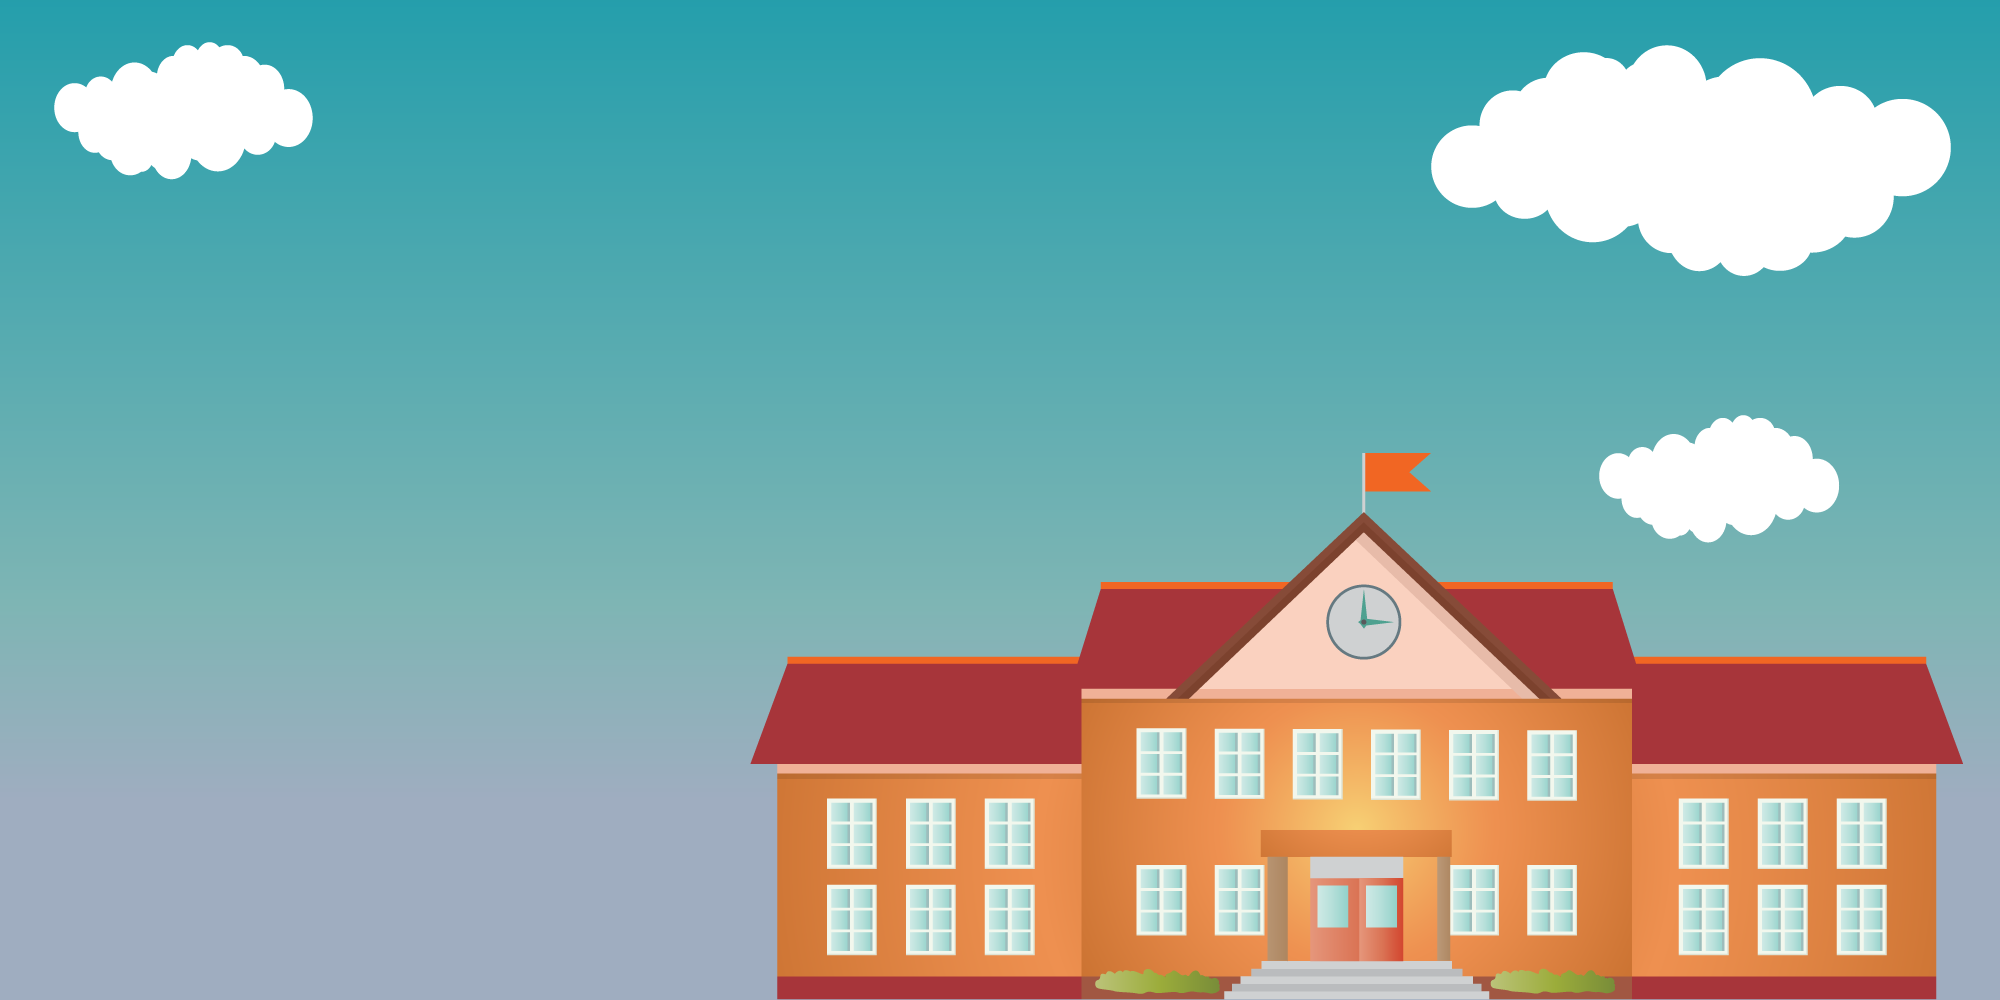 graphic of a school building with clouds above